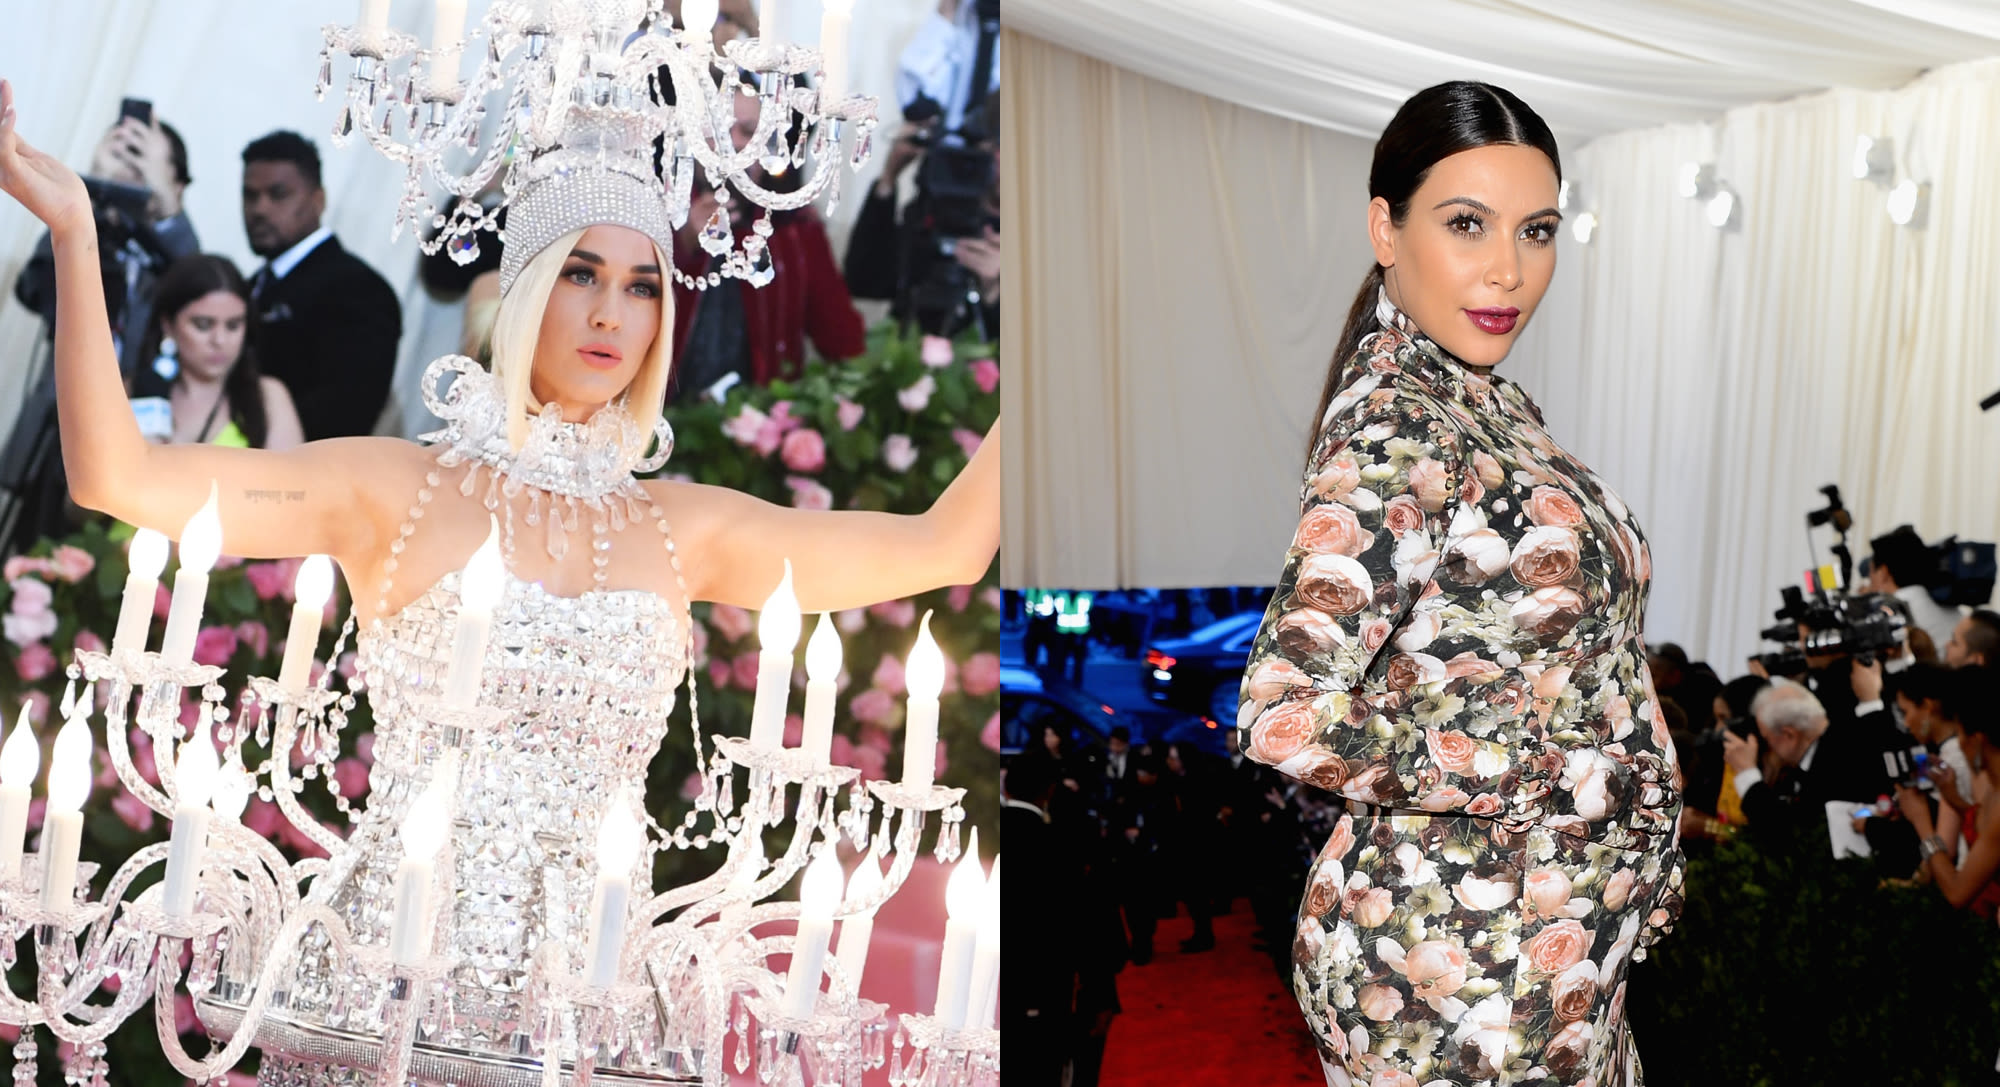 The Worst Dressed Stars in Met Gala History: Kim Kardashian, Katy Perry and More